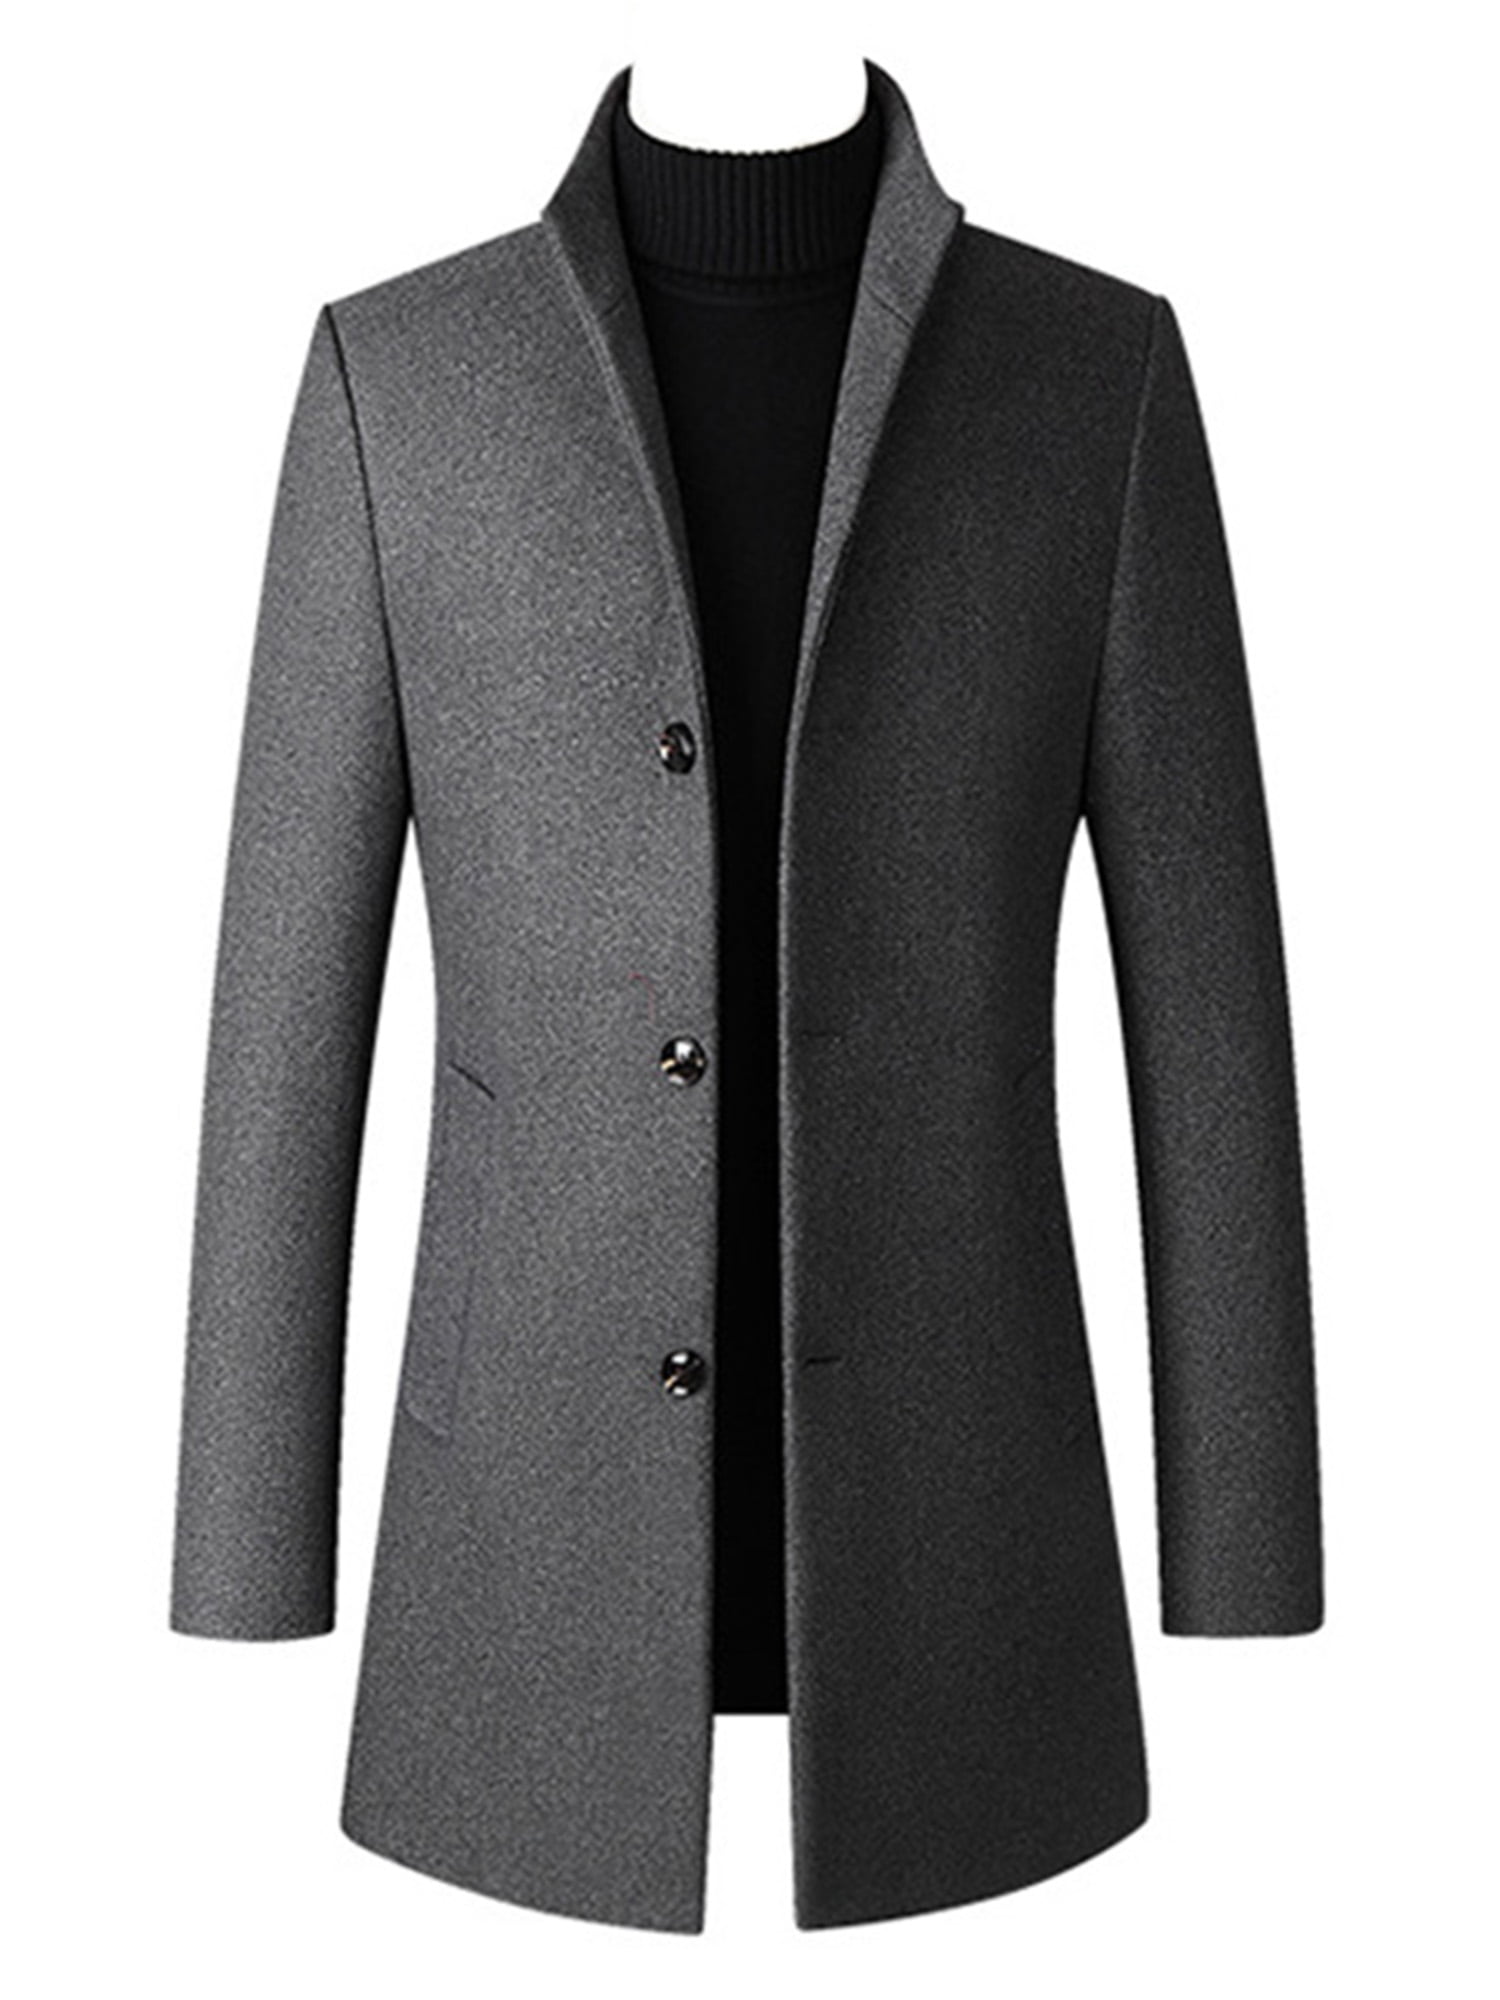 Liengoron Mens Gentle Layered Collar Single Breasted Quilted Lined Wool Blend Pea Coats